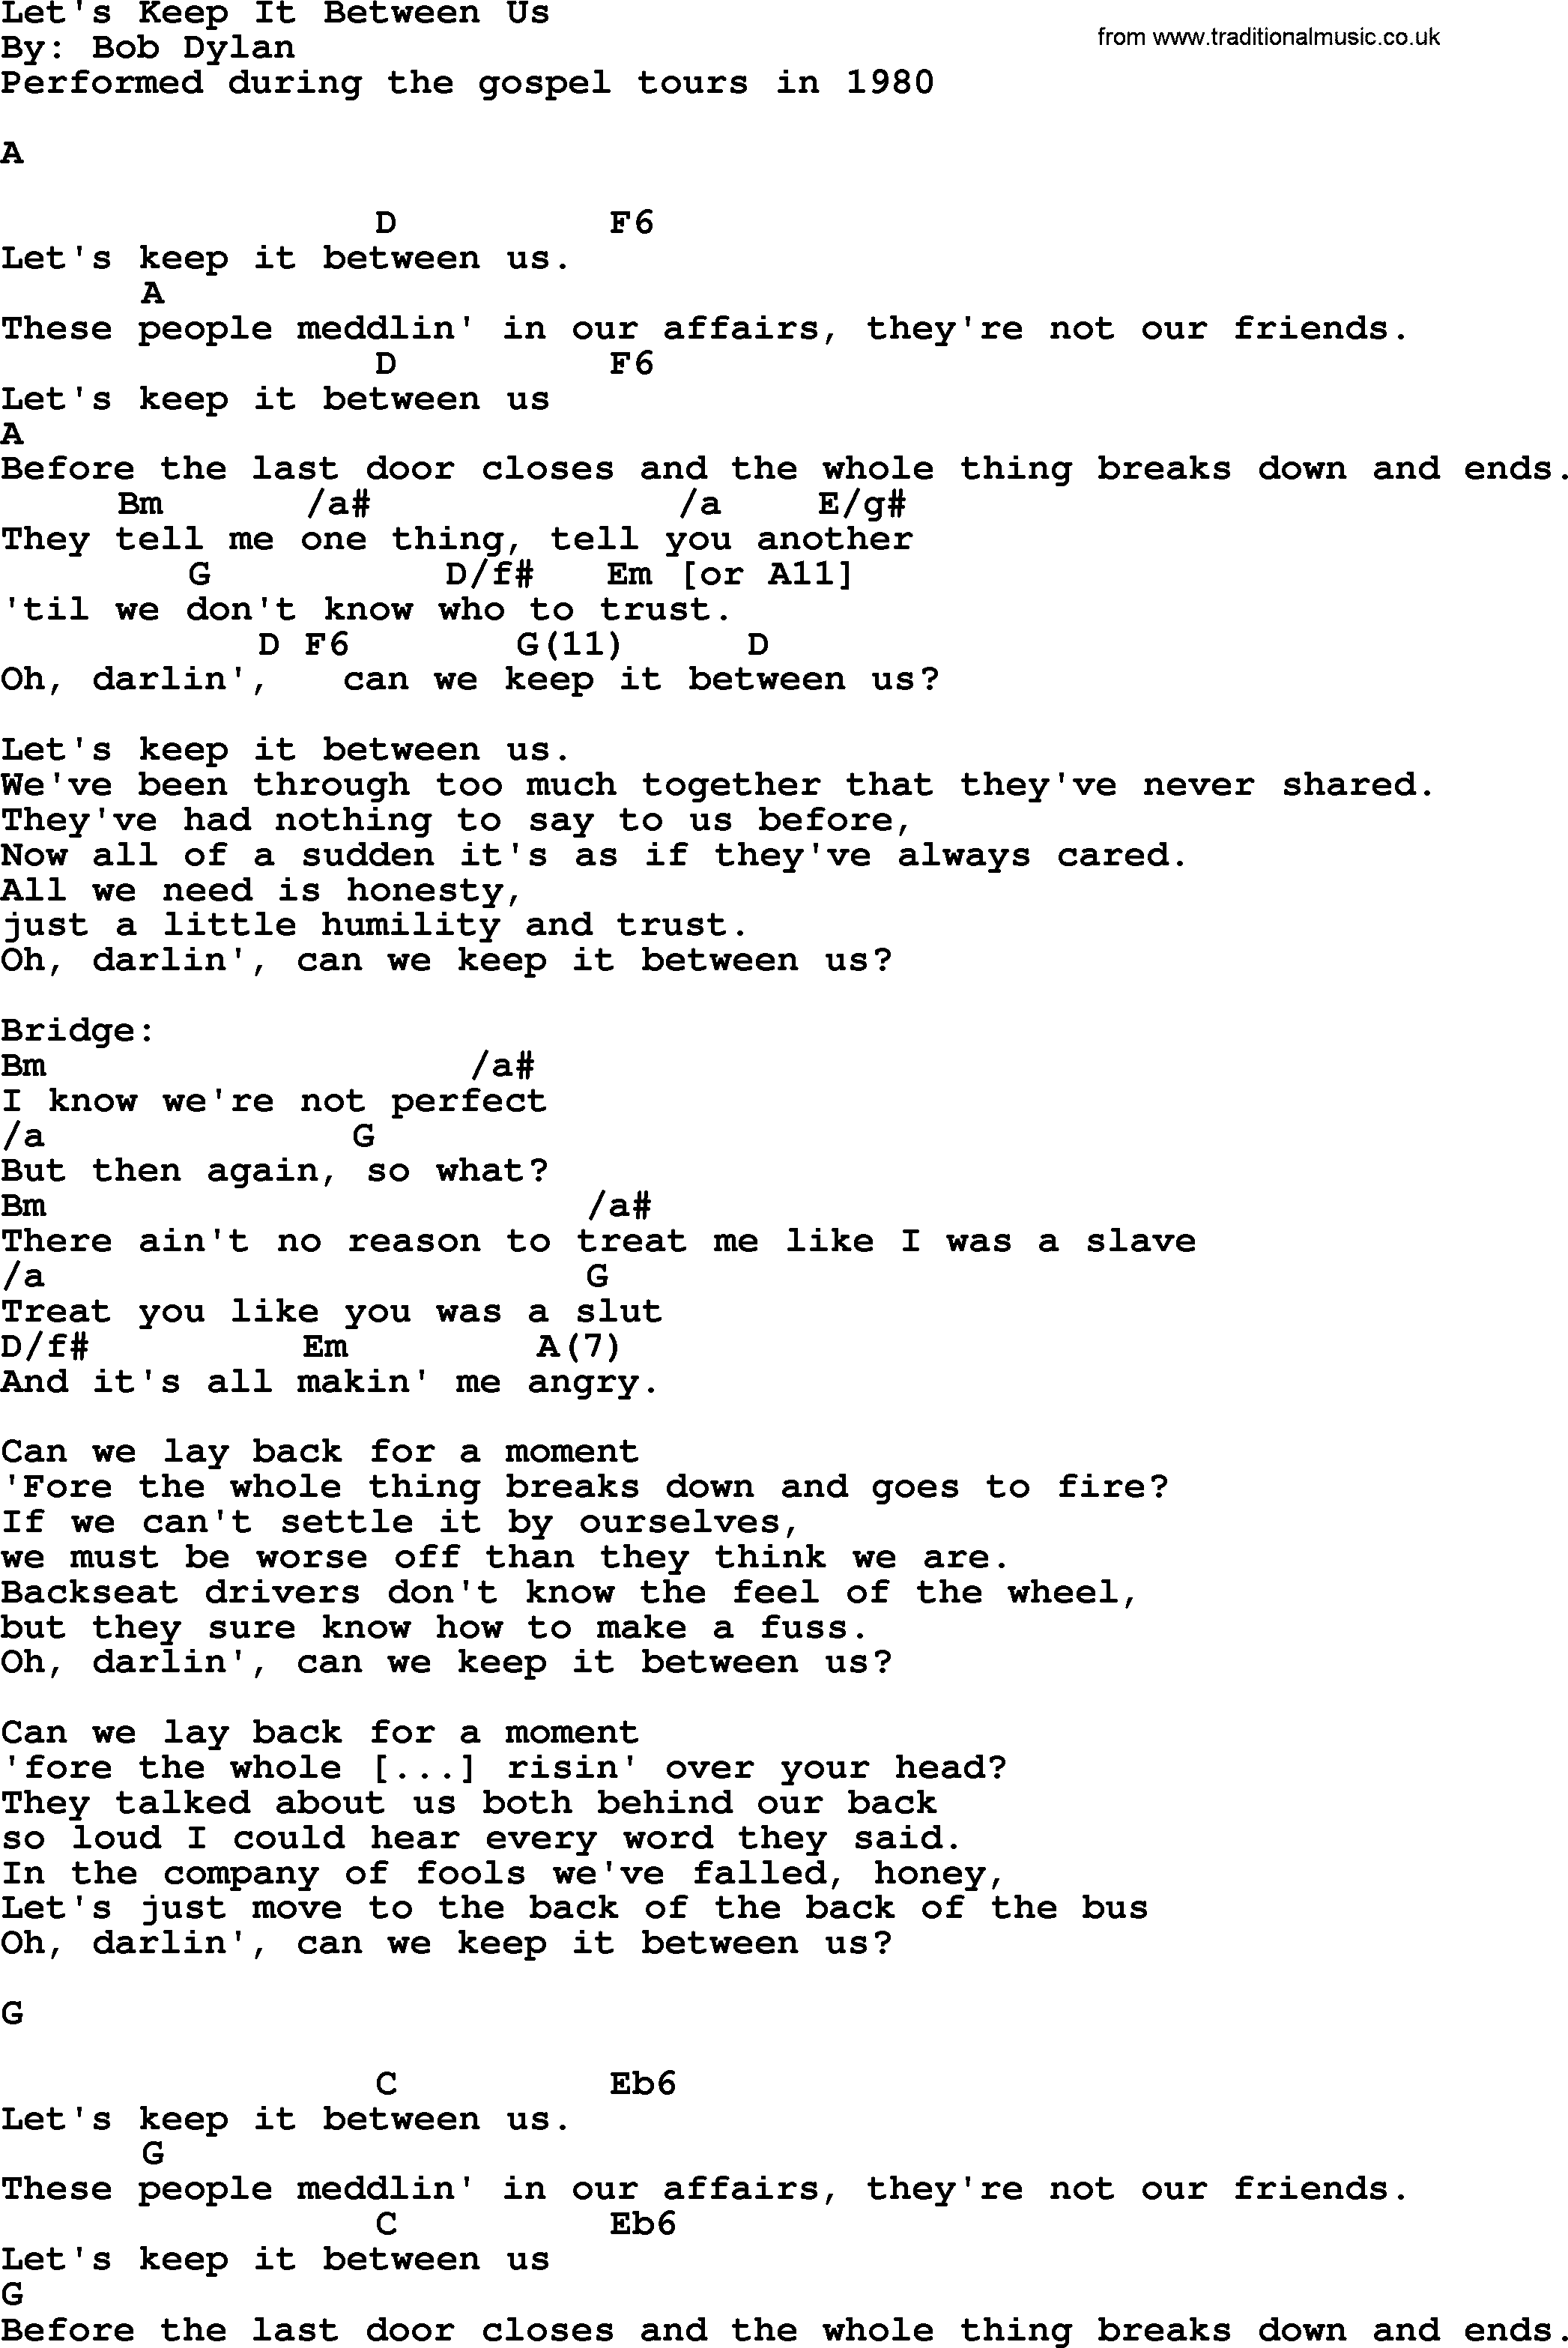 Bob Dylan song, lyrics with chords - Let's Keep It Between Us